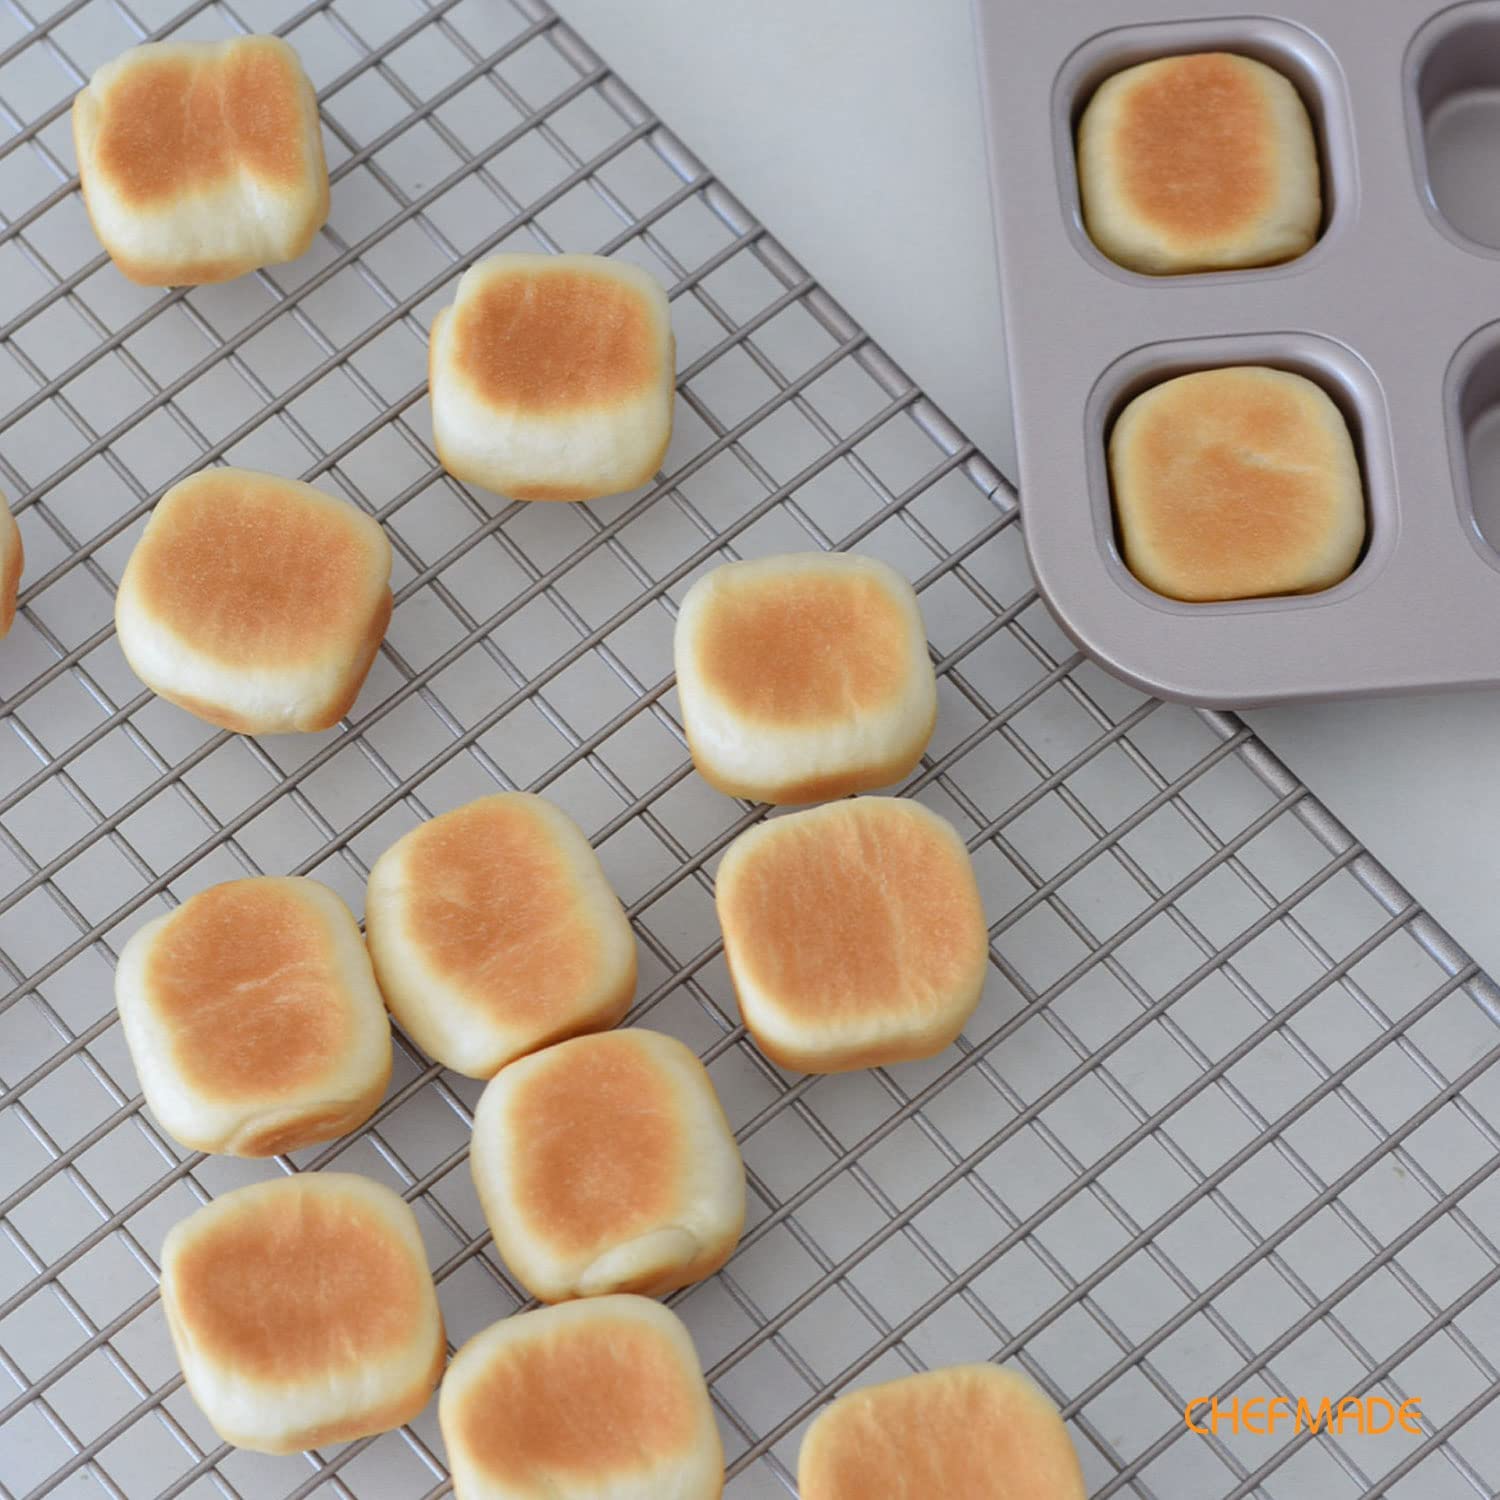 Muffin Pan Mini 20 Well - CHEFMADE official store